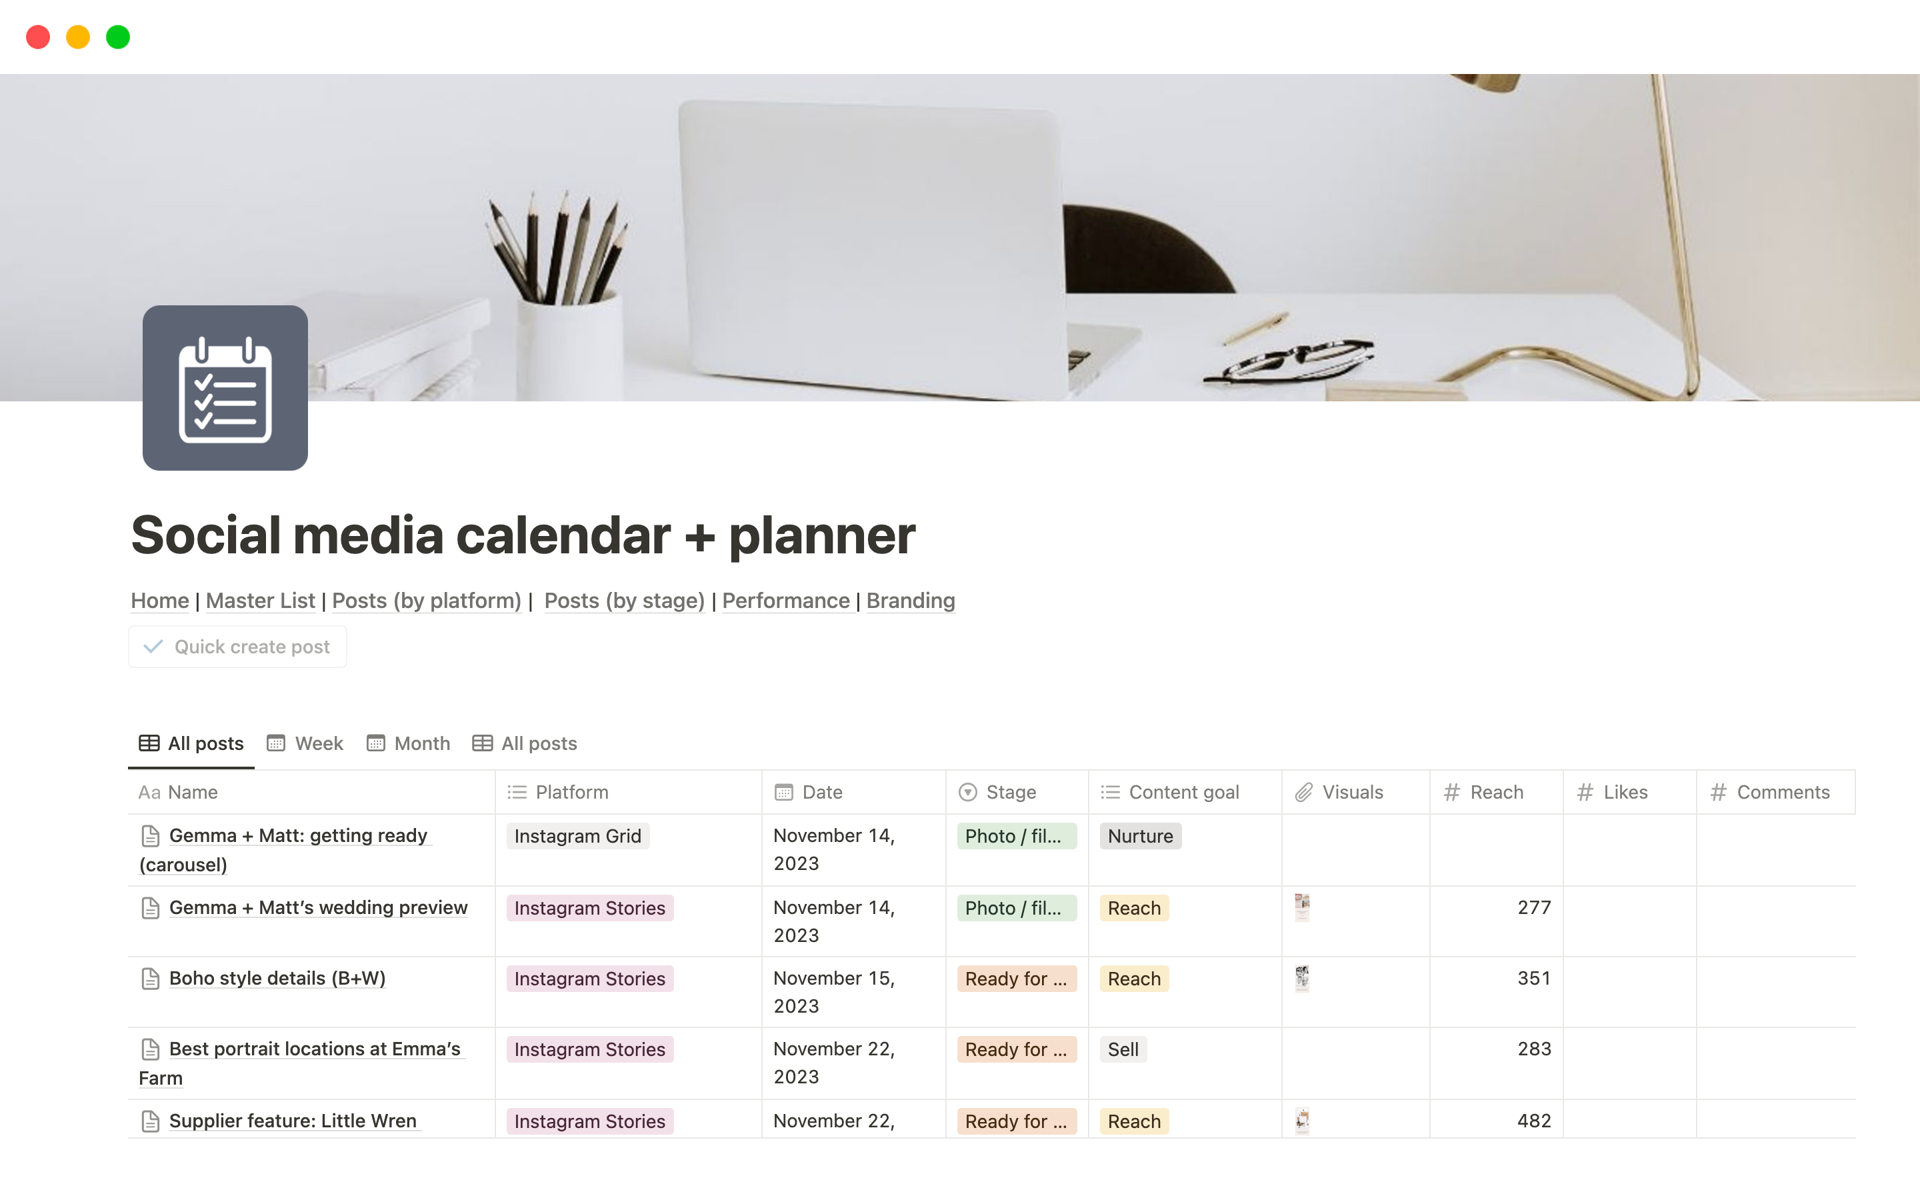 Plan your social media content across all the platforms with this calendar template for Notion, with posts by platform, weekly and monthly calendars, a 'quick add' post button, branding sections and an engagement tracker. 